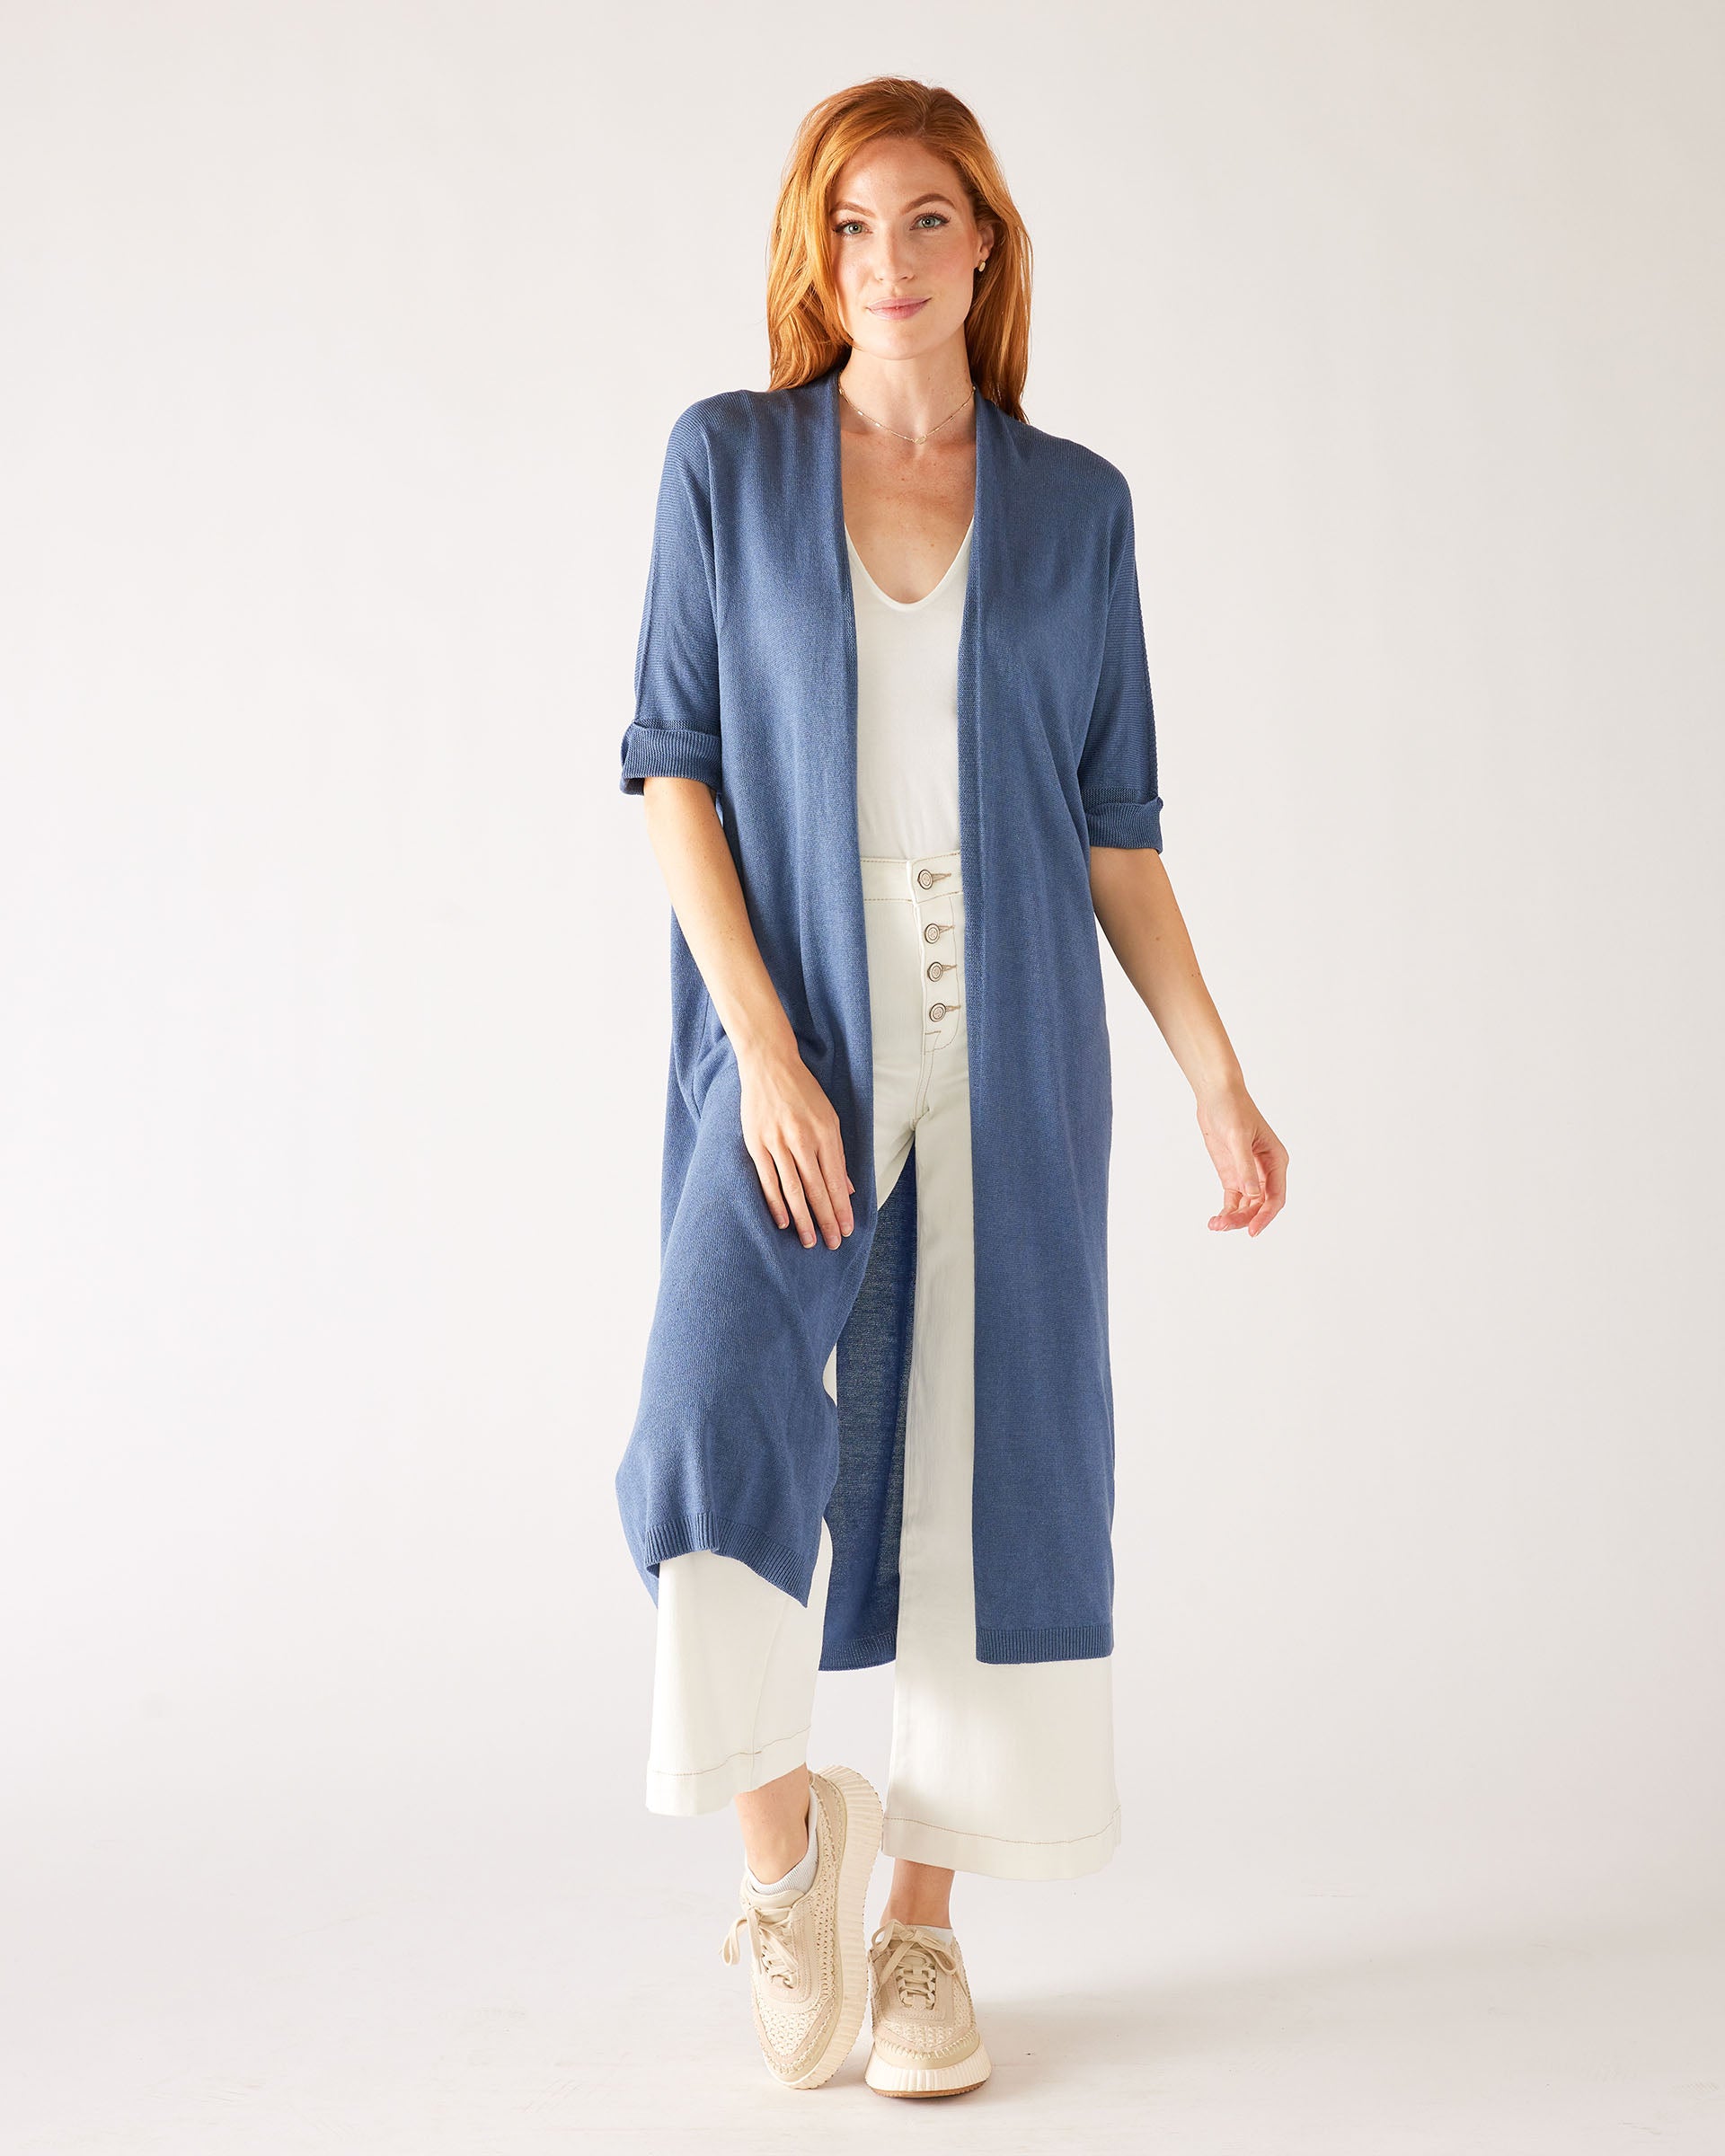 Womens Dark Blue Lightweight Cuffed Elbow Length Sleeves Duster Full Body Front View